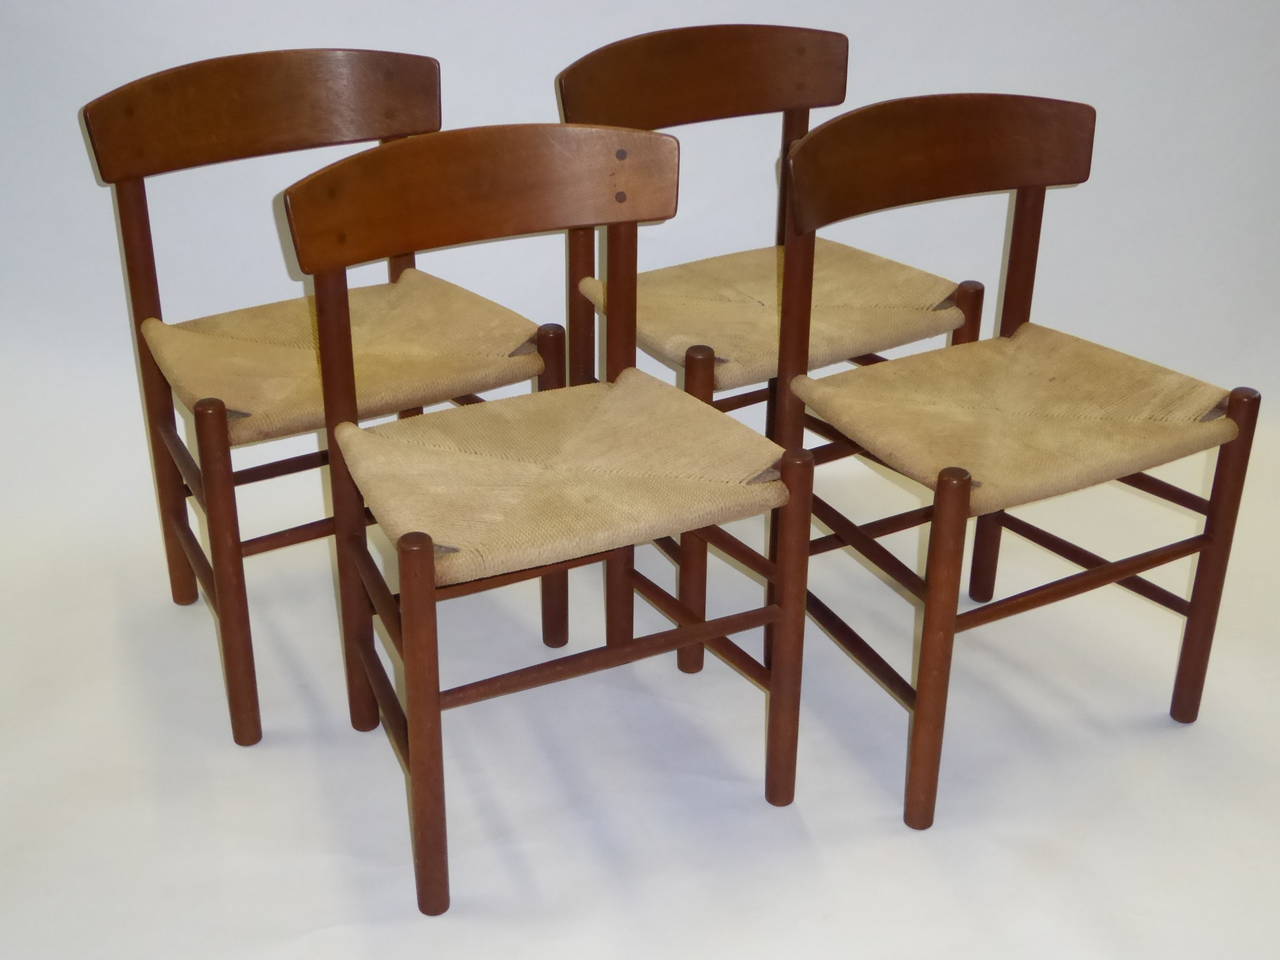 SOLD  Four J39 Chairs designed by Børge Møgensen in 1947 for FDB Mobler  of Denmark.  An iconic Shaker style chair, these in soaped oak with Danish paper cord seats.  The four in beautiful oak are in excellent sound condition, with the seats having